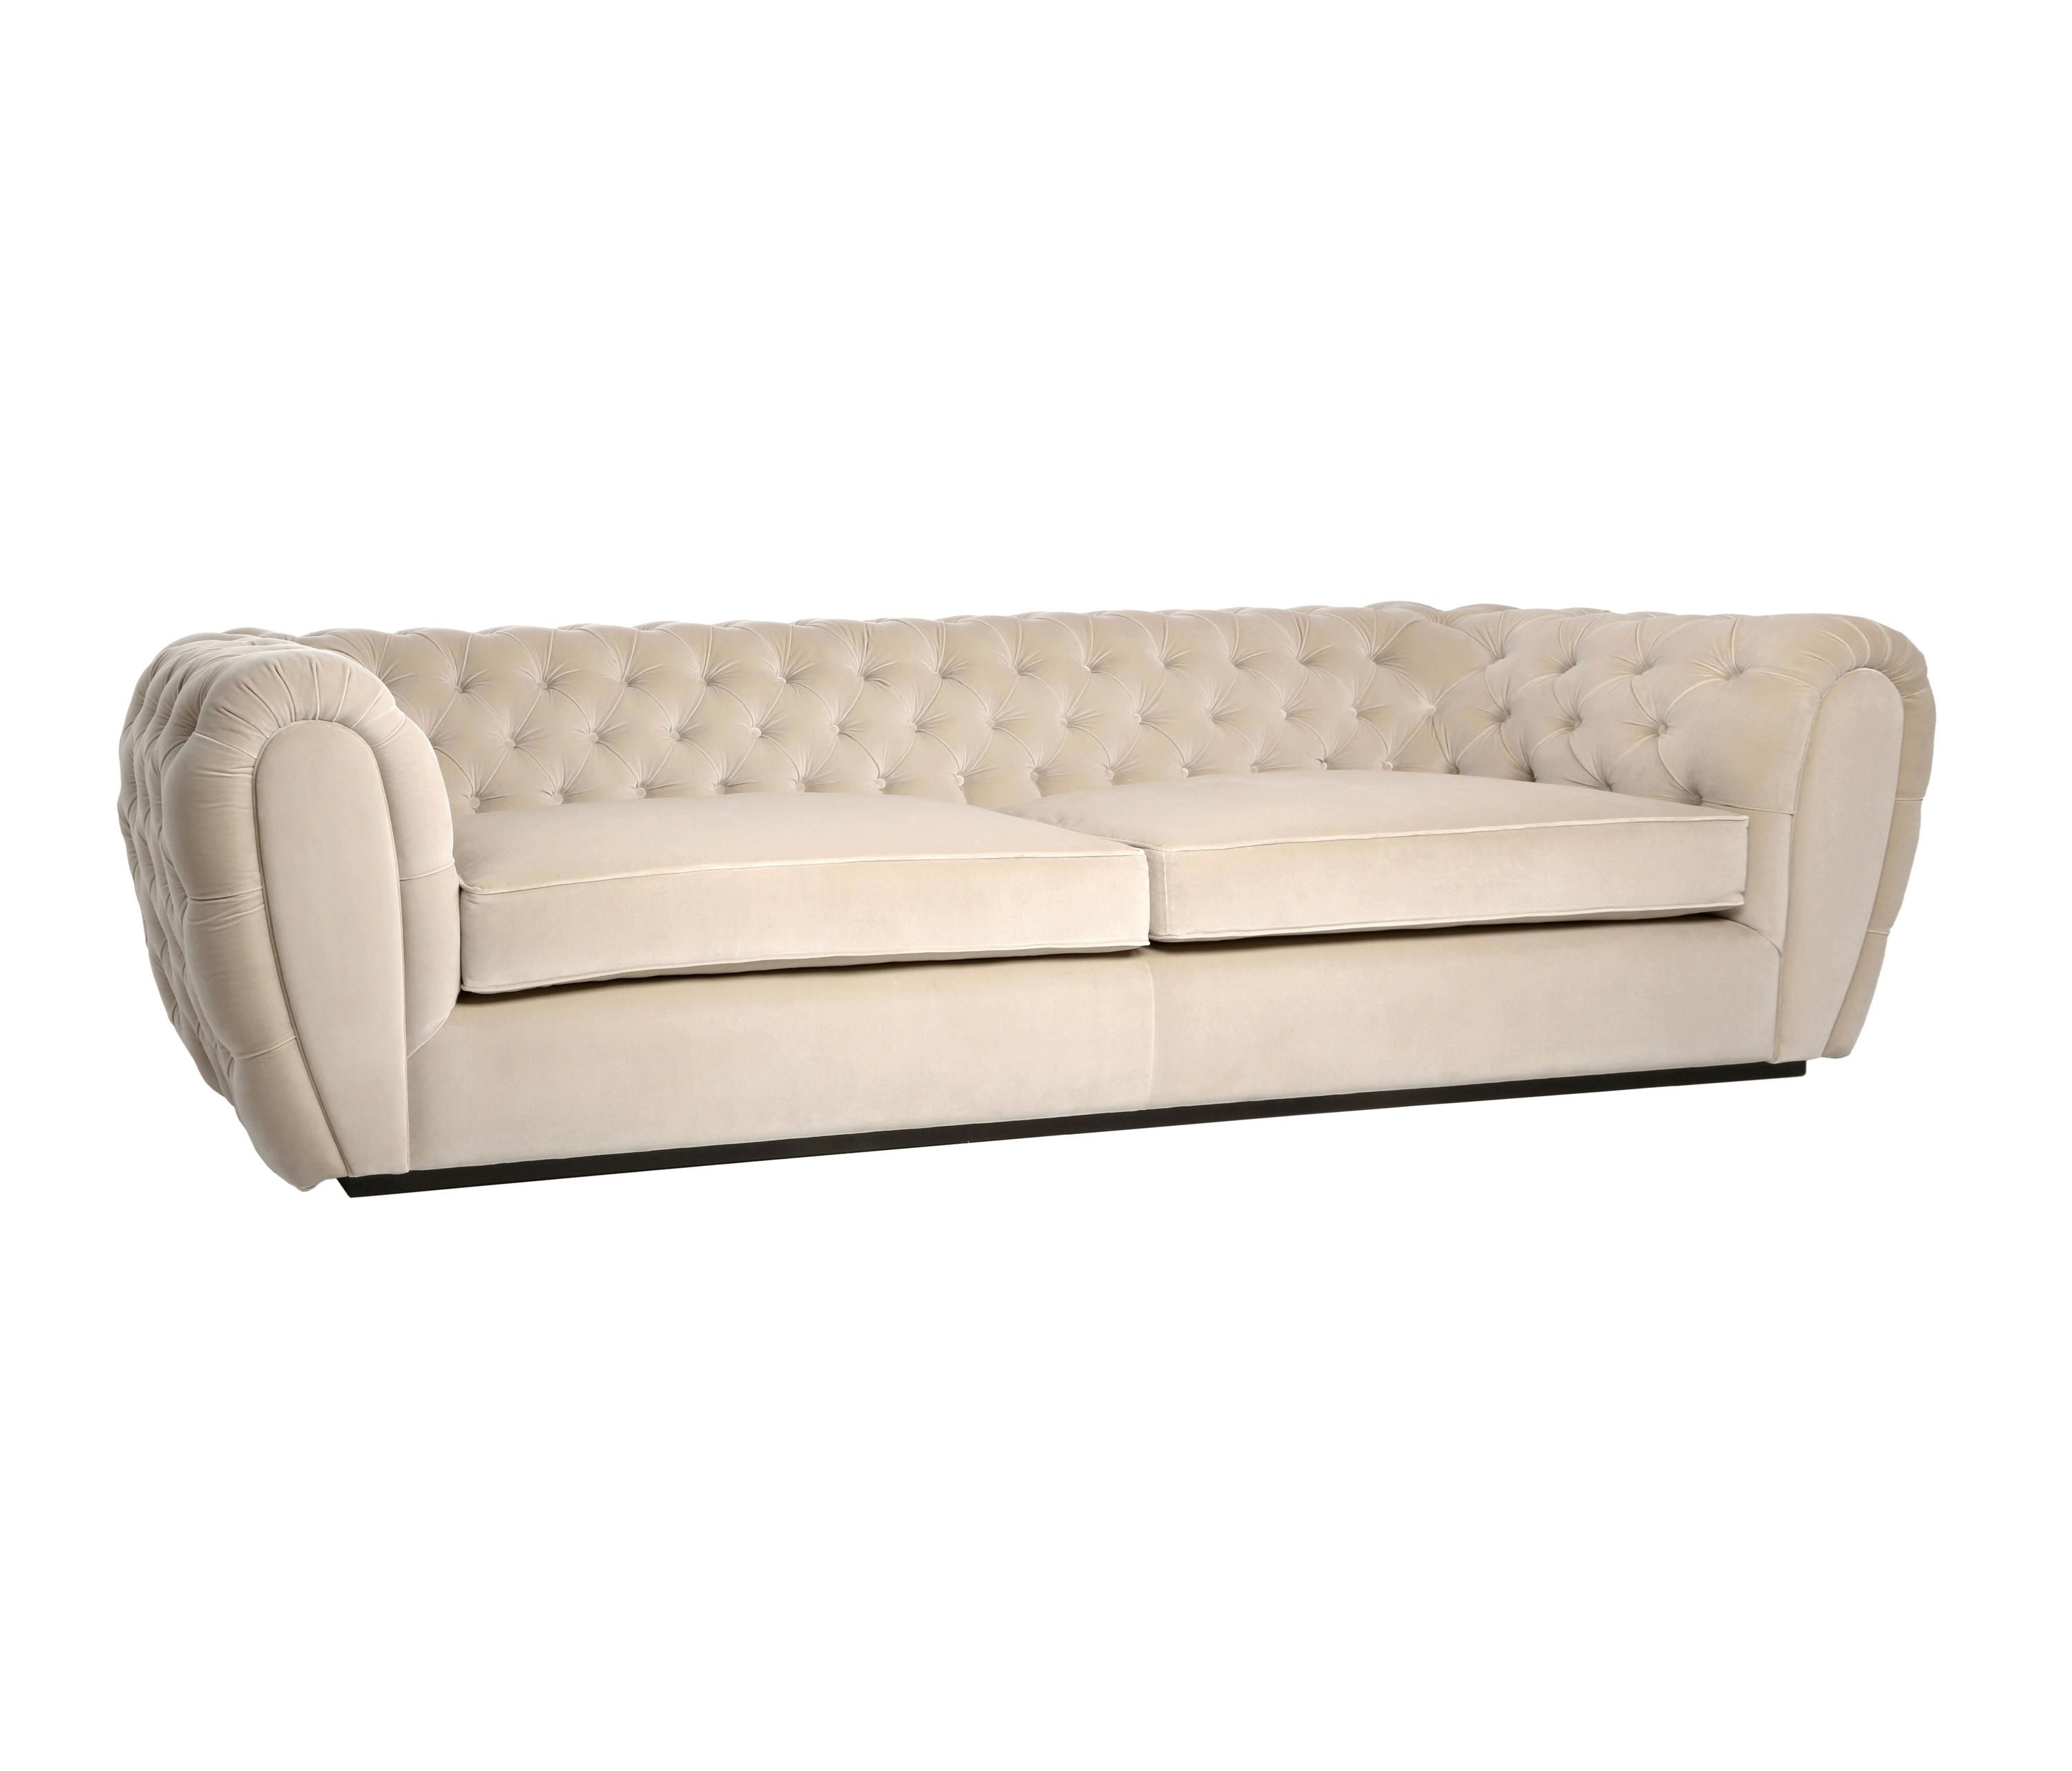 Windsor Sofa – Lounge Sofas From The Sofa & Chair Company Ltd With Favorite Windsor Sofas (View 18 of 20)